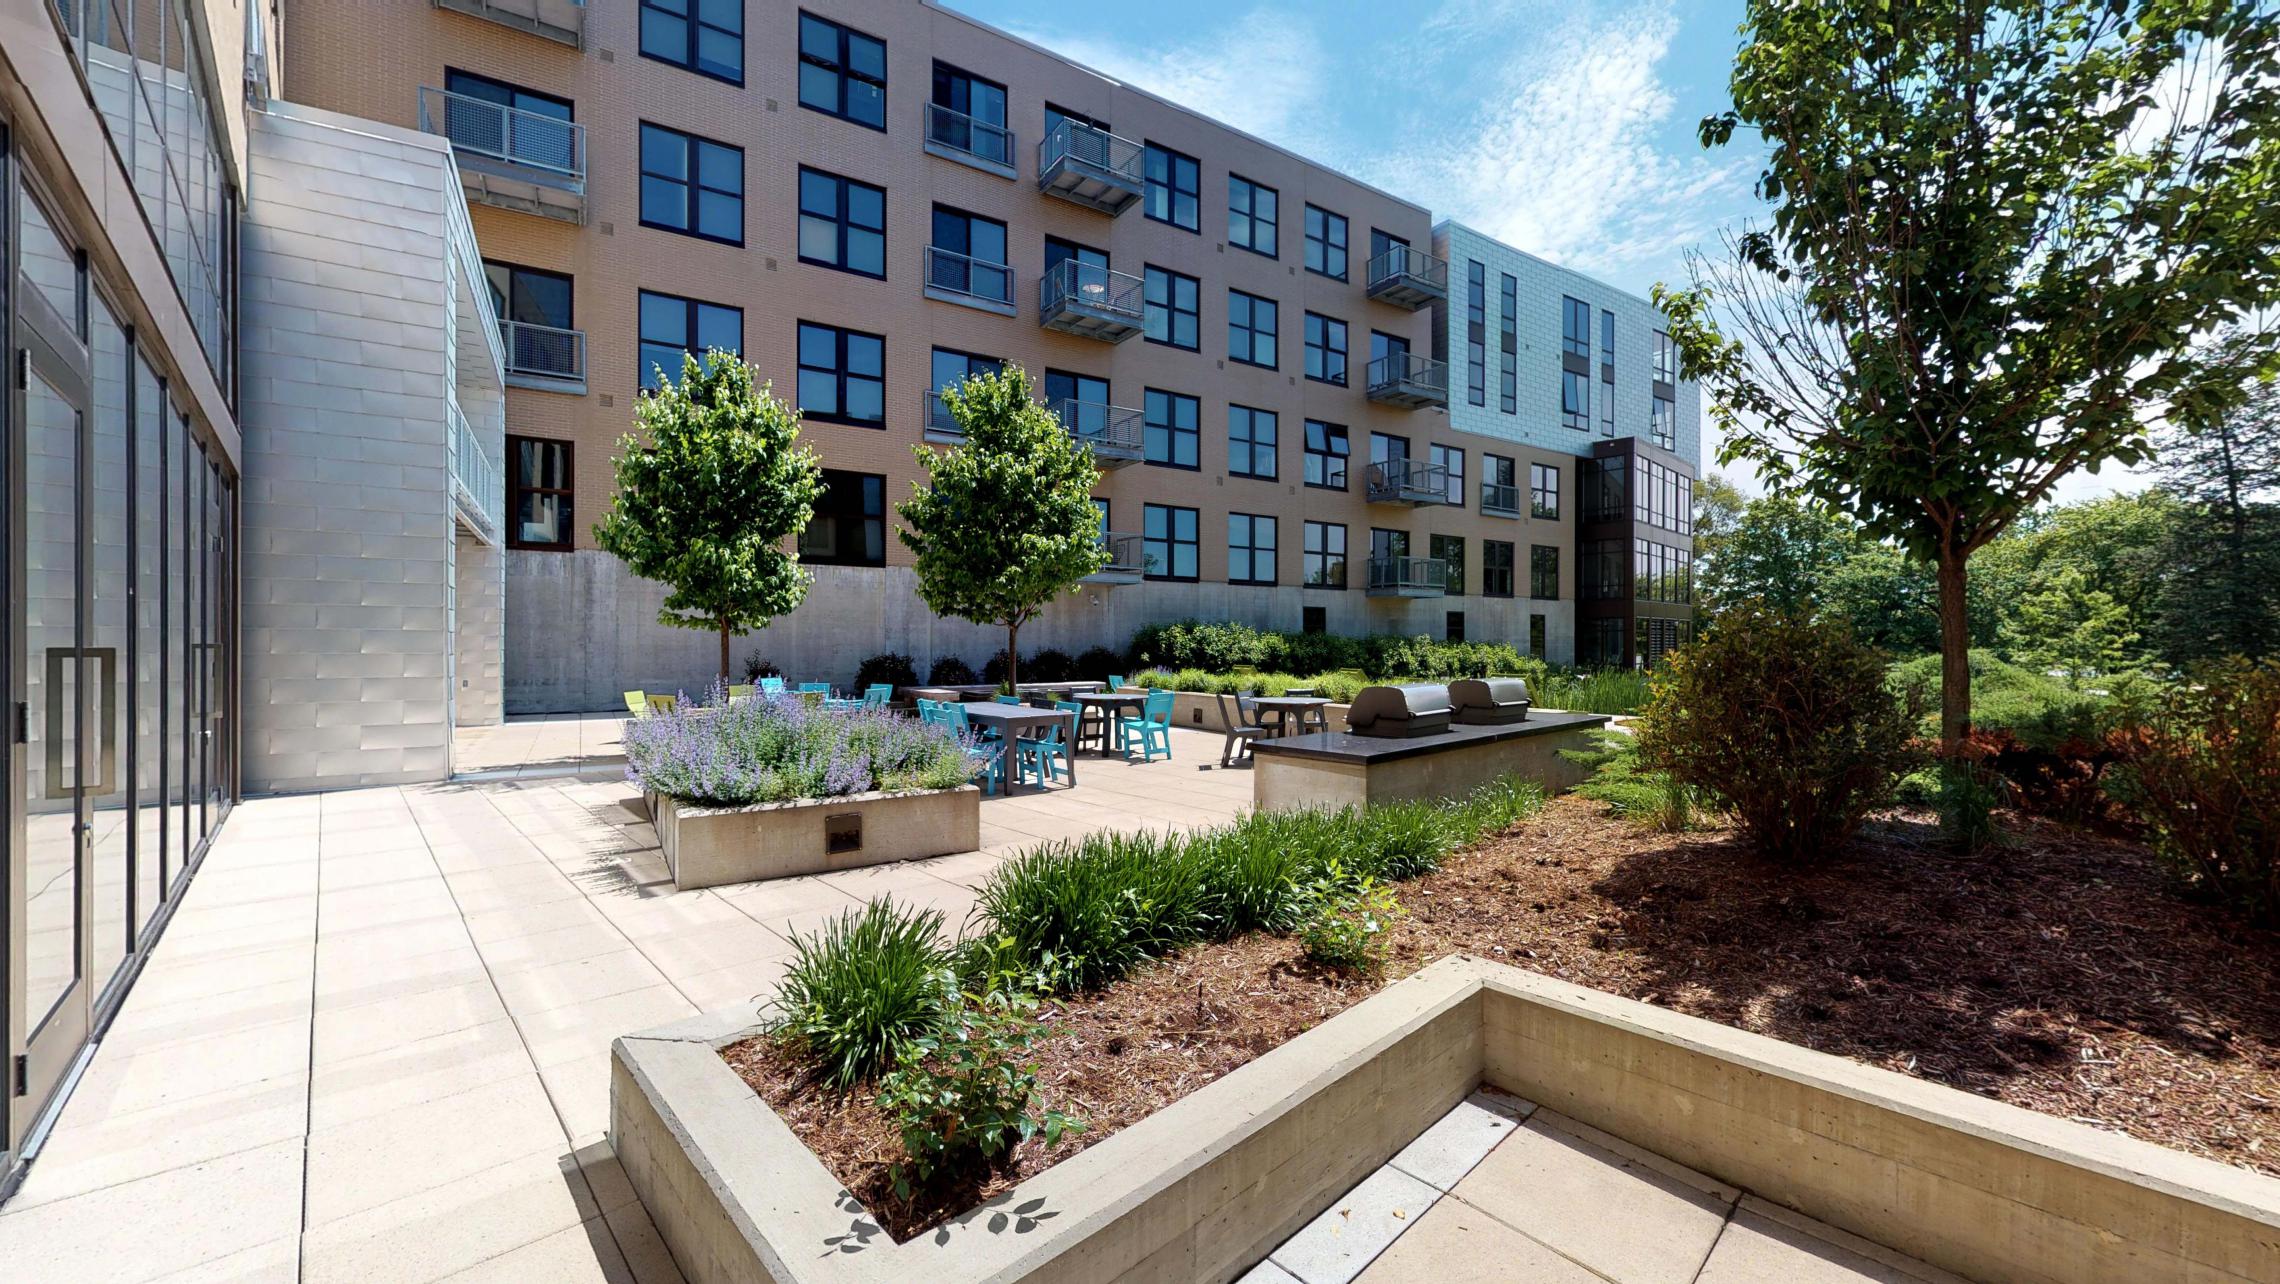 SEVEN27-115-Apartment-Patio-Courtyard_modern-upscale-downtown-lakeview-madison-city.jpg